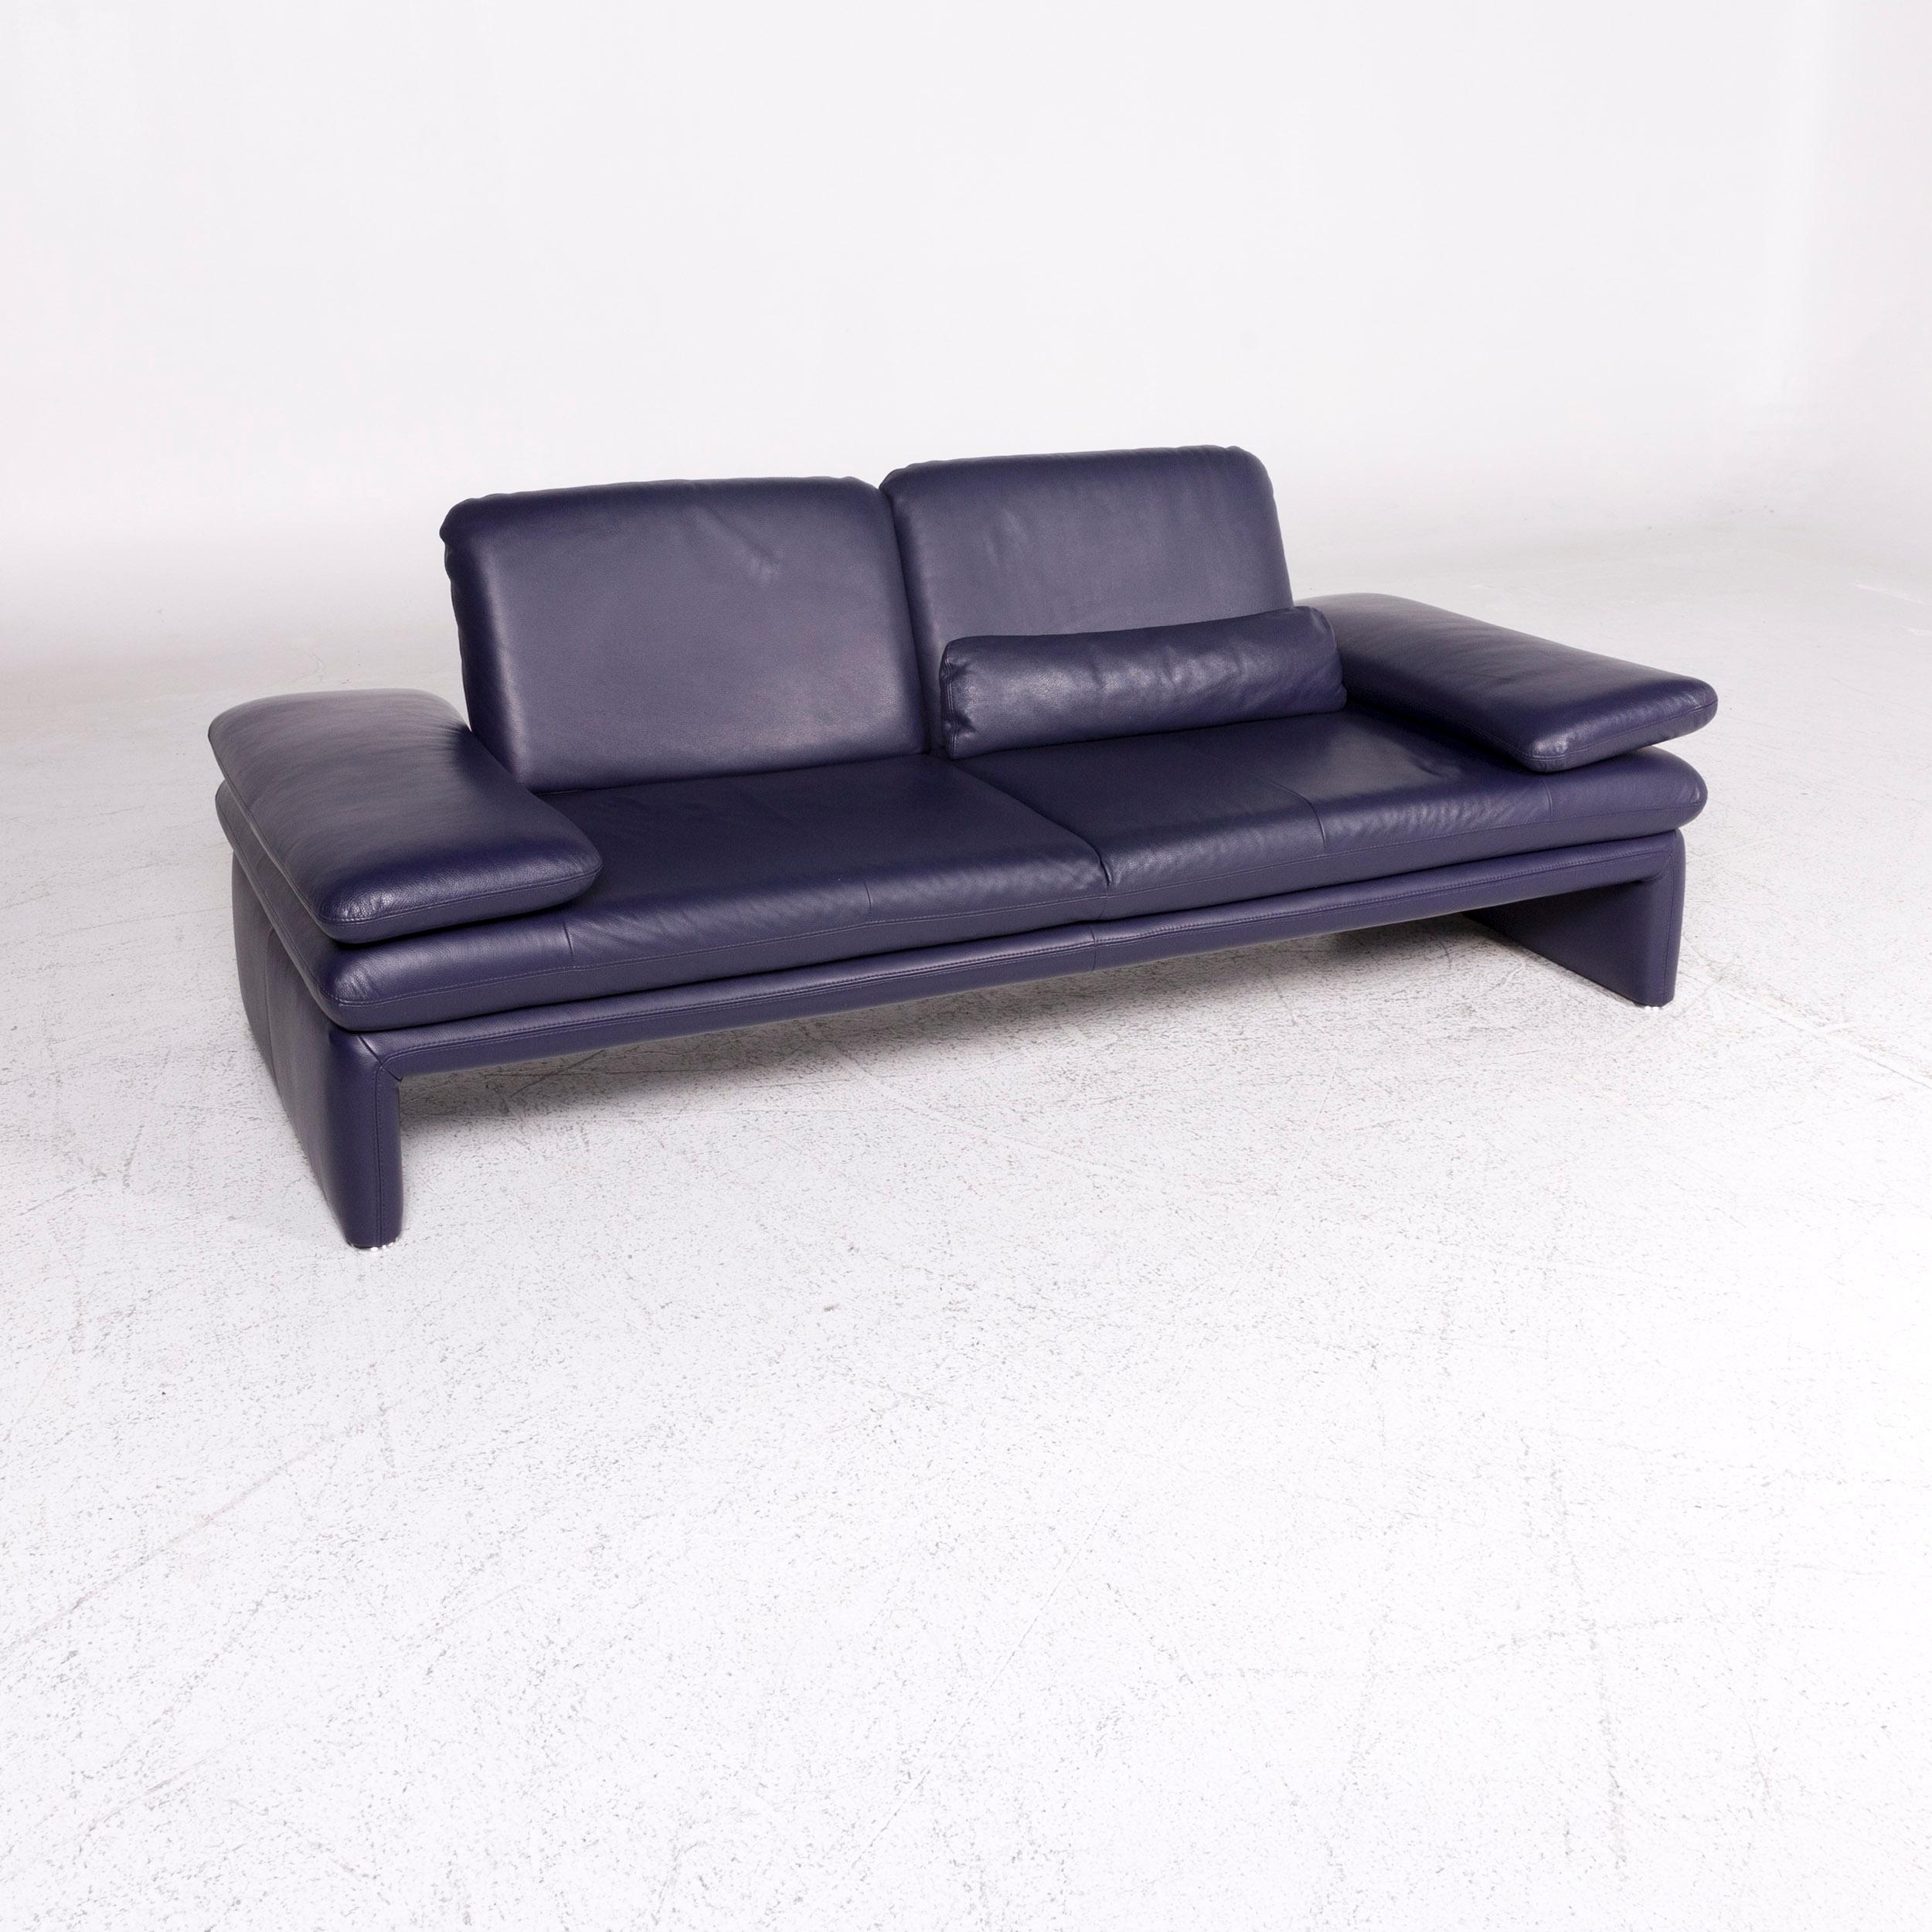 We bring to you a Willi Schillig leather sofa purple two-seat couch.

 Product measurements in centimeters:
 
 Depth 92
Width 215
Height 85
Seat-height 43
Rest-height 53
Seat-depth 56
Seat-width 143
Back-height 41.
 
    